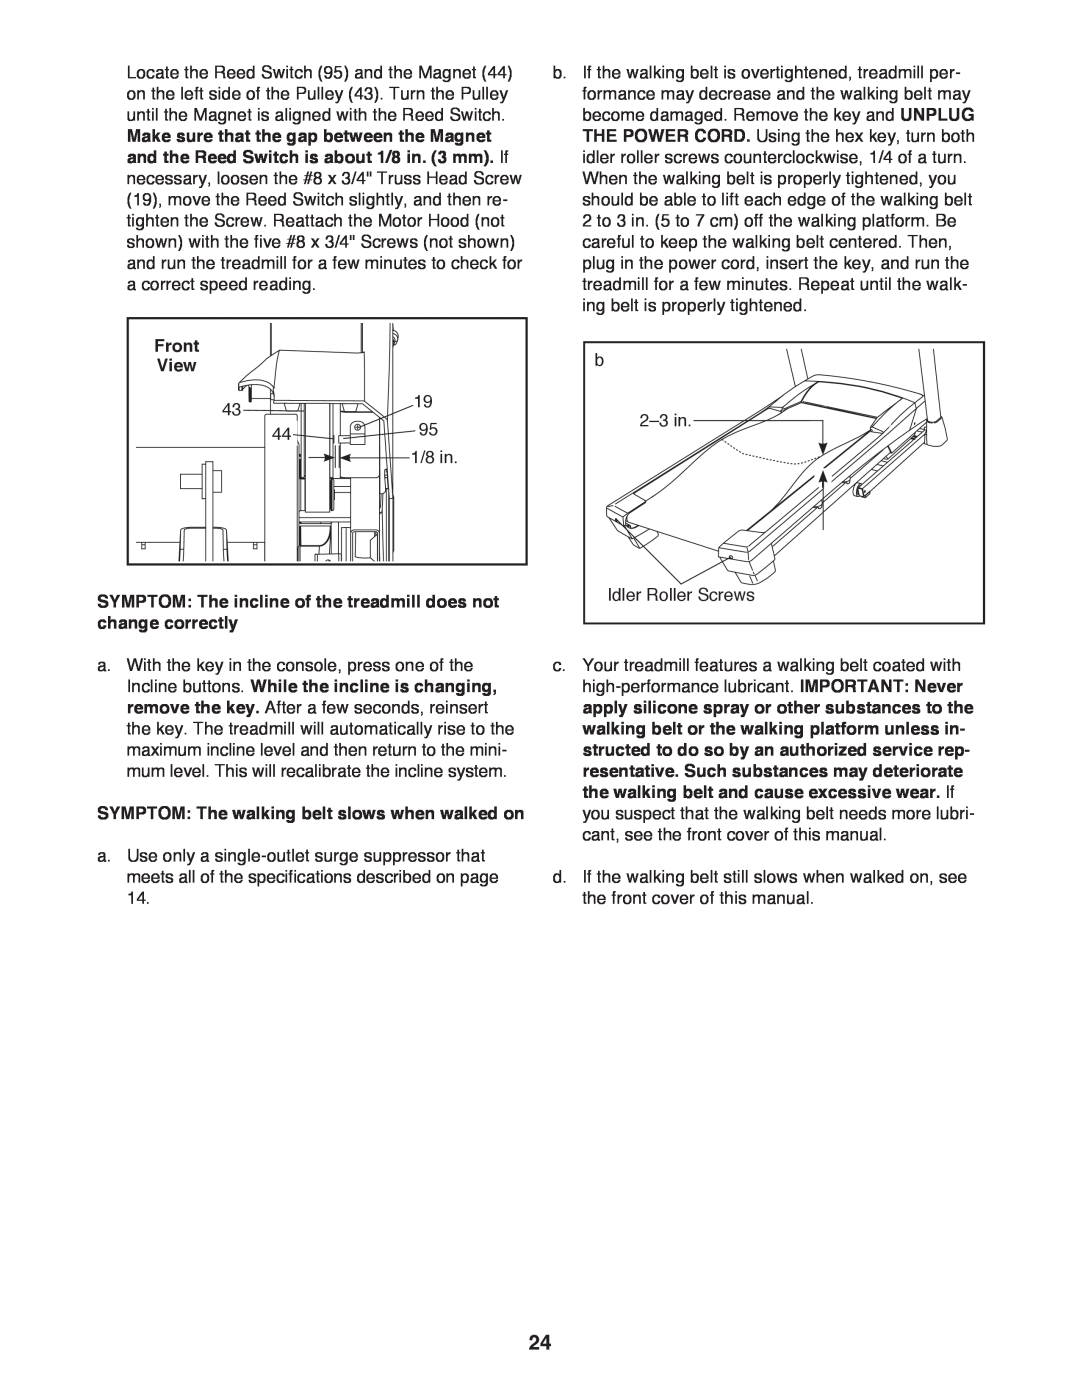 Sears NTL61011.1 user manual Front View, SYMPTOM The incline of the treadmill does not change correctly 